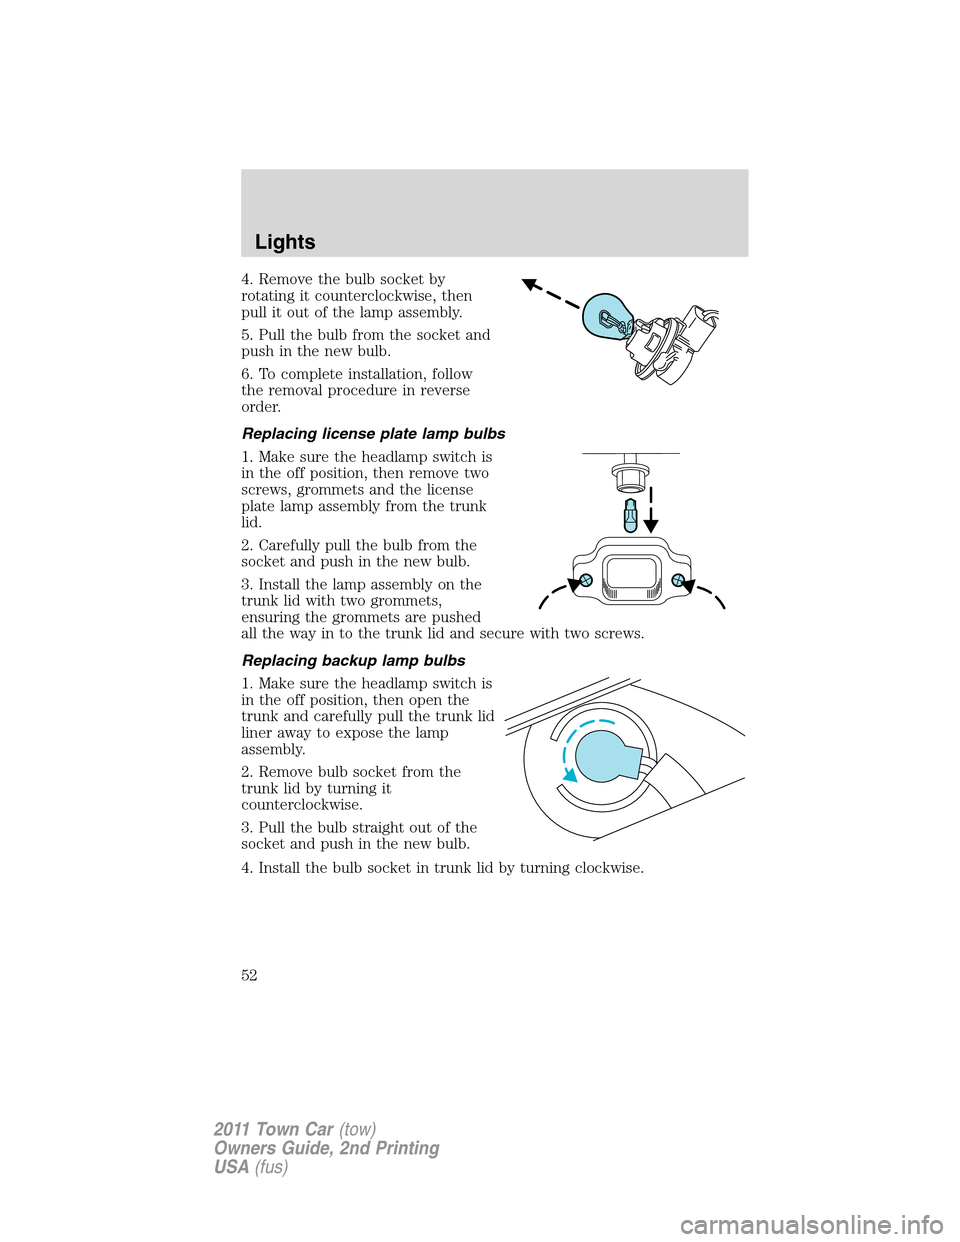 LINCOLN TOWN CAR 2011 Workshop Manual 4. Remove the bulb socket by
rotating it counterclockwise, then
pull it out of the lamp assembly.
5. Pull the bulb from the socket and
push in the new bulb.
6. To complete installation, follow
the rem